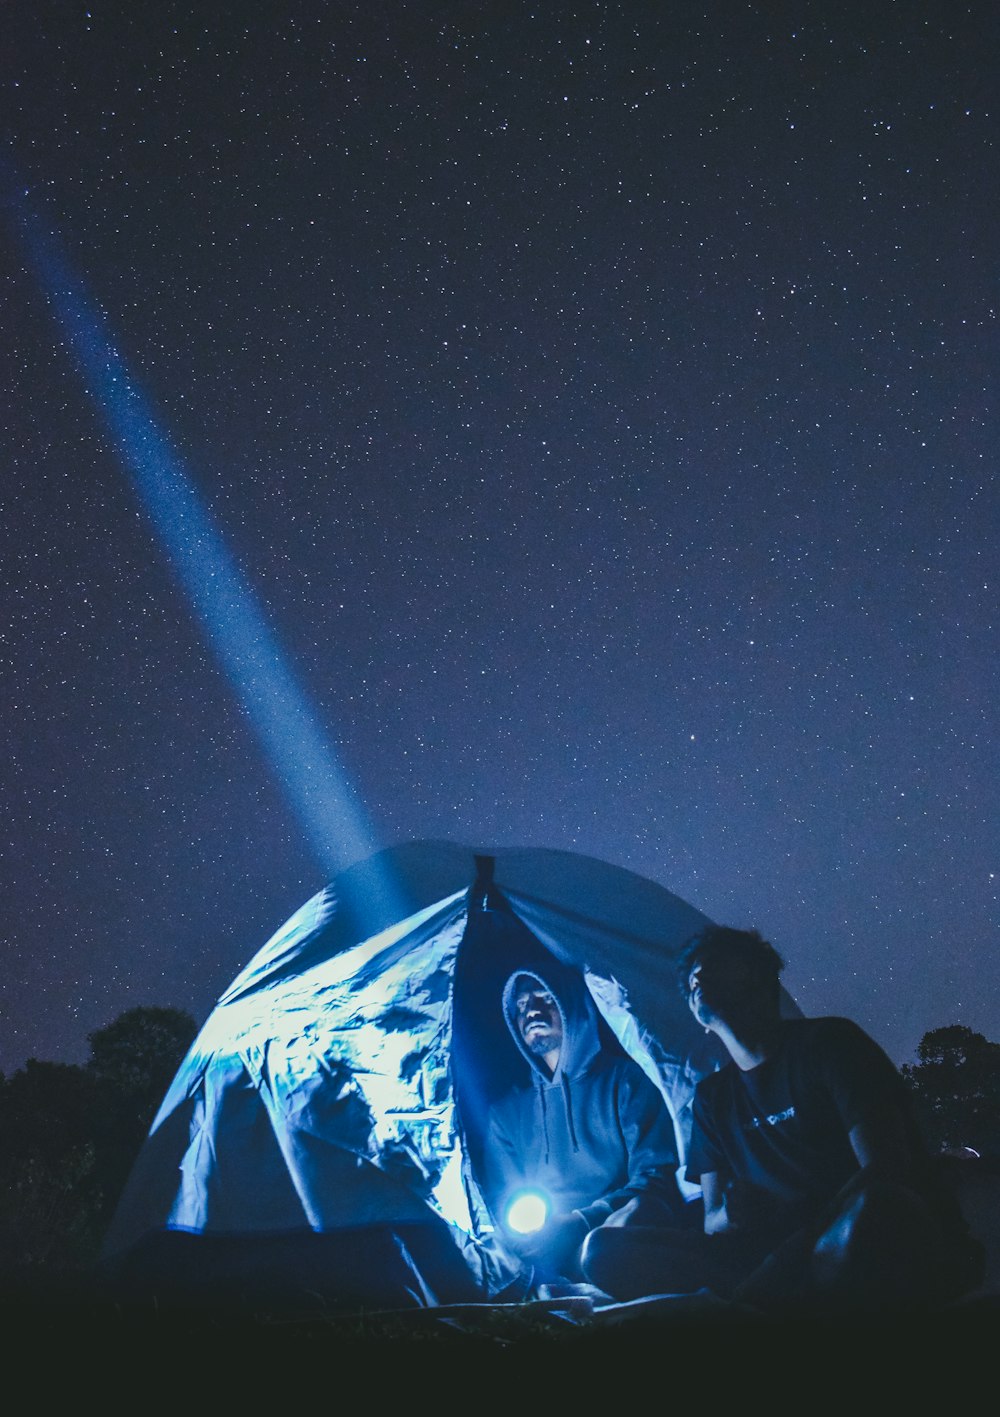 a man sitting in front of a tent under a sky filled with stars